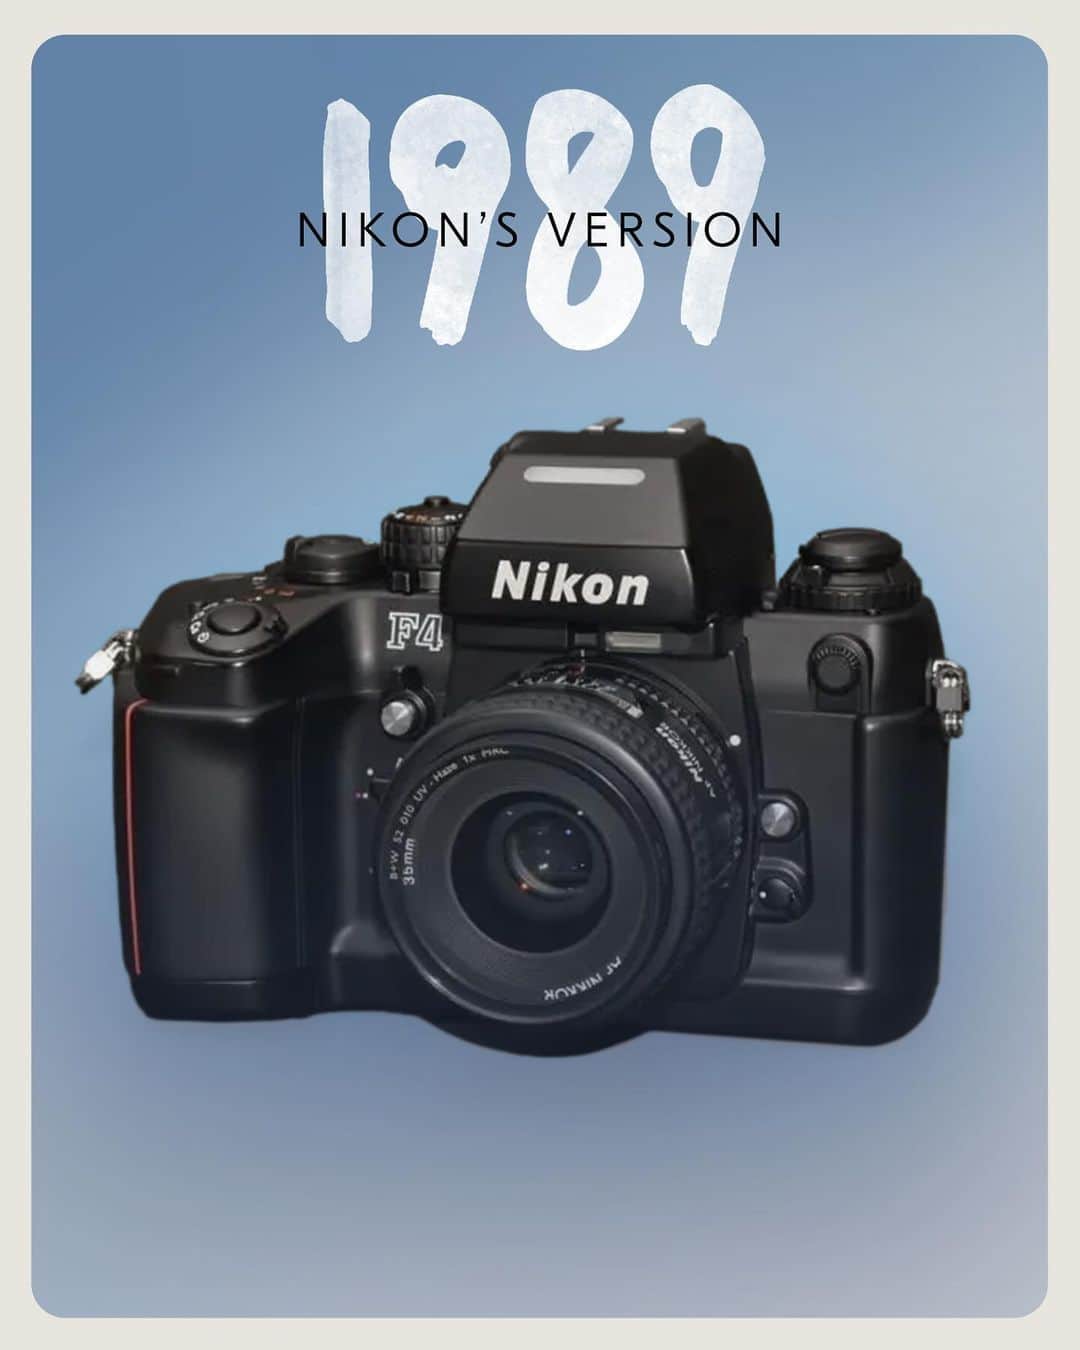 NikonUSAのインスタグラム：「1989 (Nikon’s version).   We’ll never go out of style.」